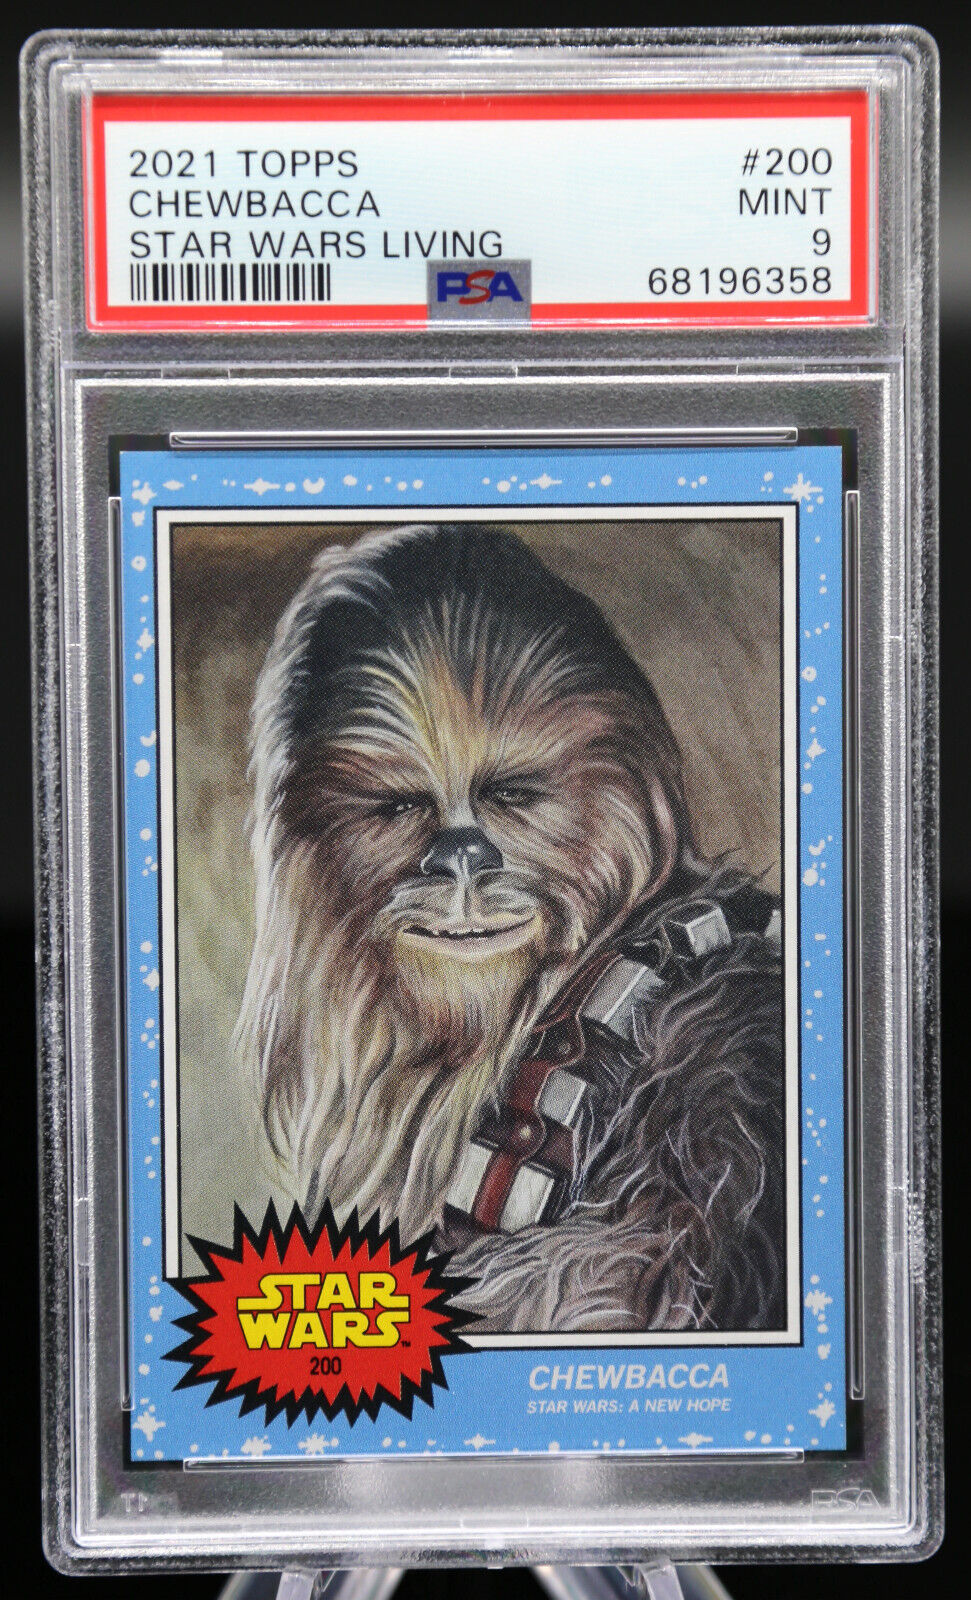 2021 Topps Star Wars Living CHEWBACCA #200 A New Hope SP PSA 9 Mint ✨ 🎬